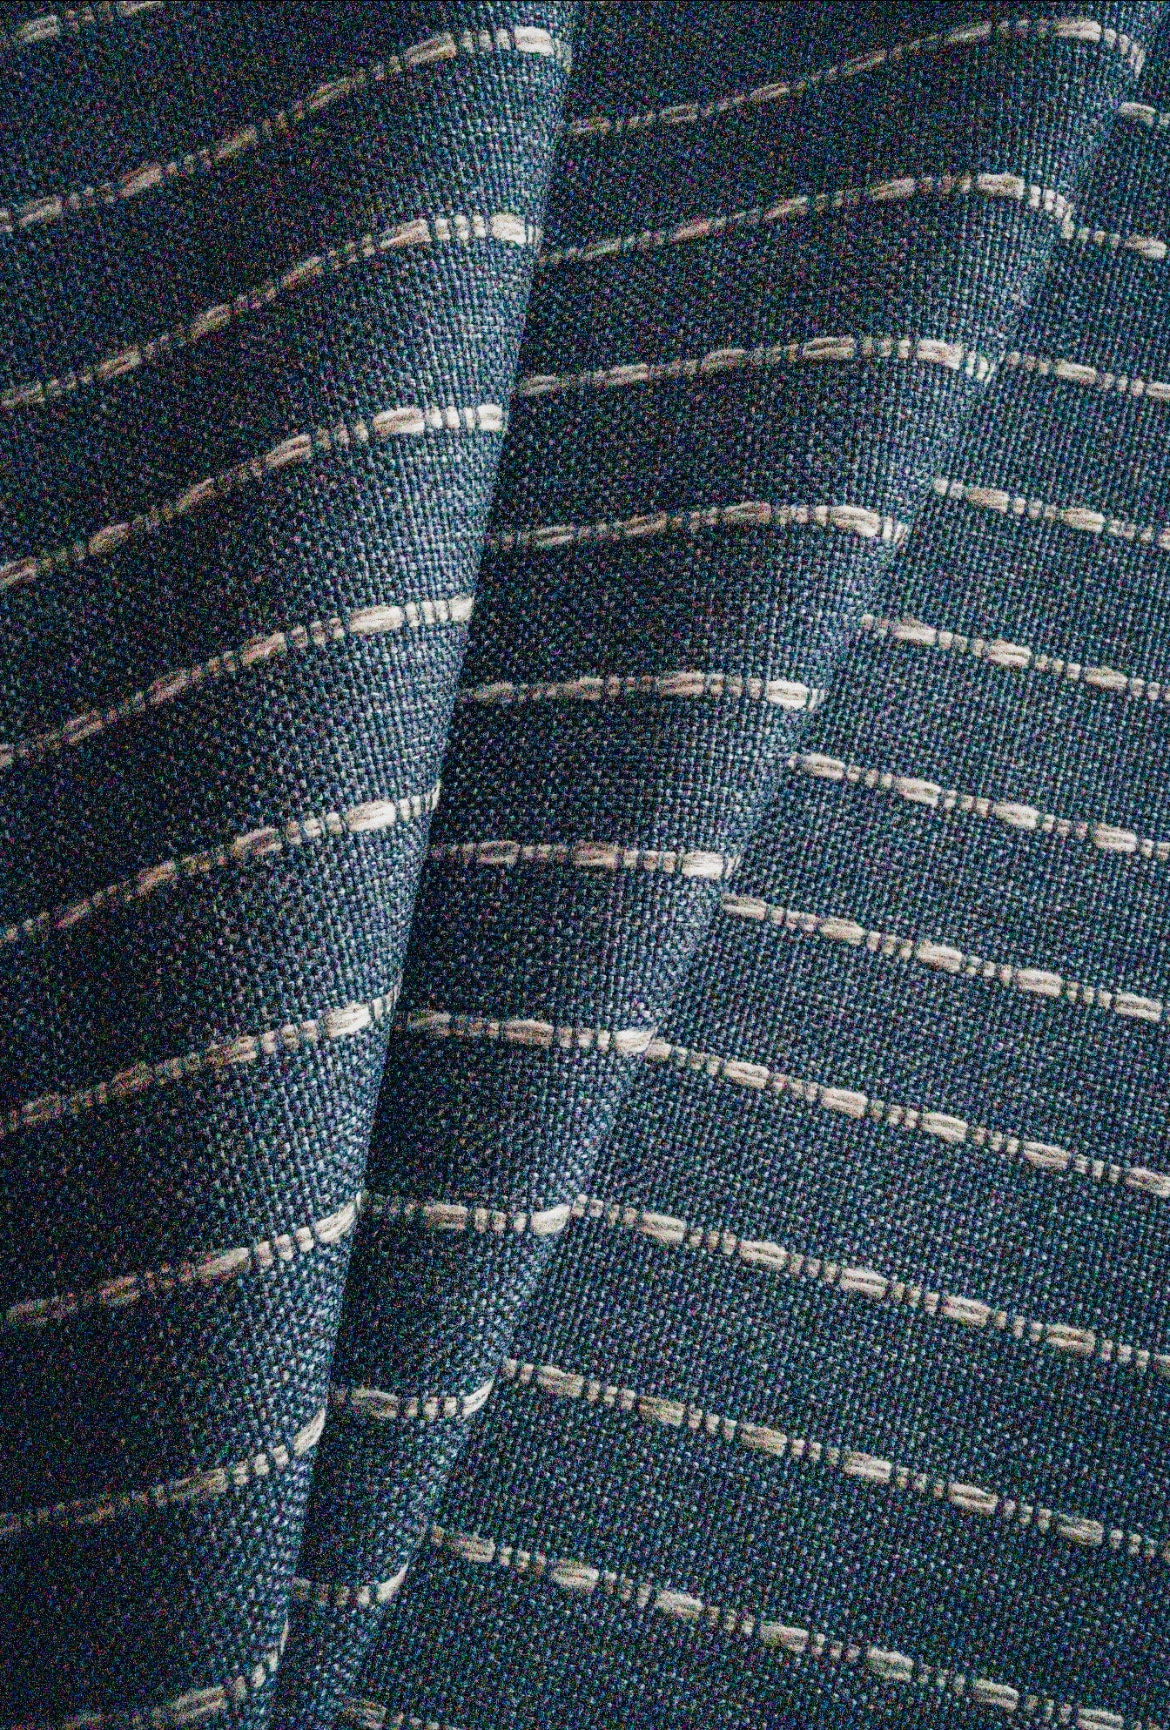 Blue Plaid Upholstery Fabric by the Yard, Blue Large Check Fabric for Chairs,  Buffalo Plaid Fabric, Plaid Cushion Fabric, Blue Check Fabric 